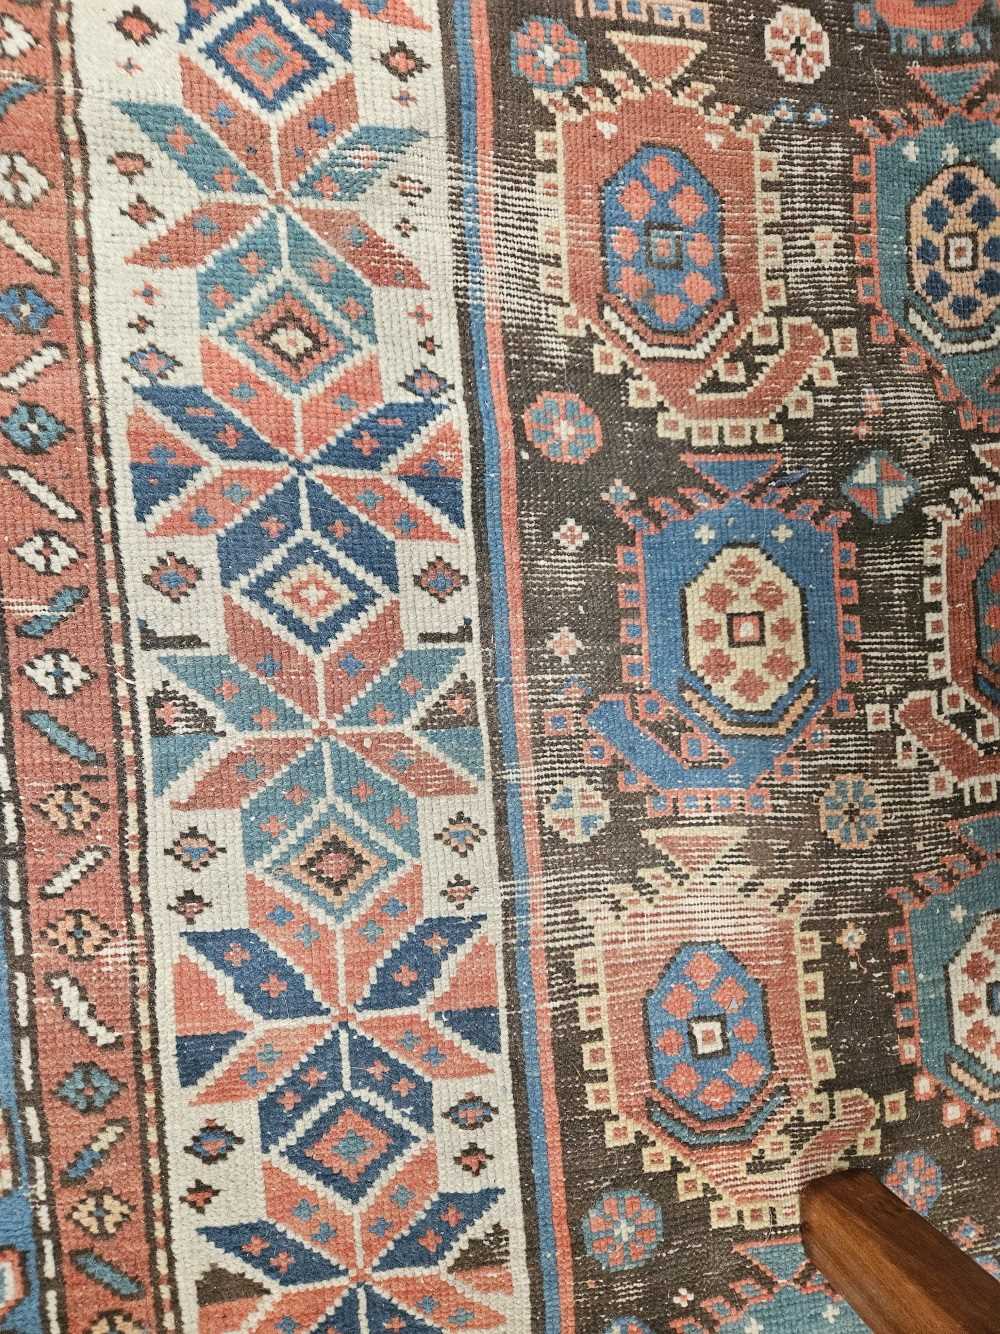 AN ANTIQUE CAUCASIAN TRIBAL RUG. - Image 6 of 7